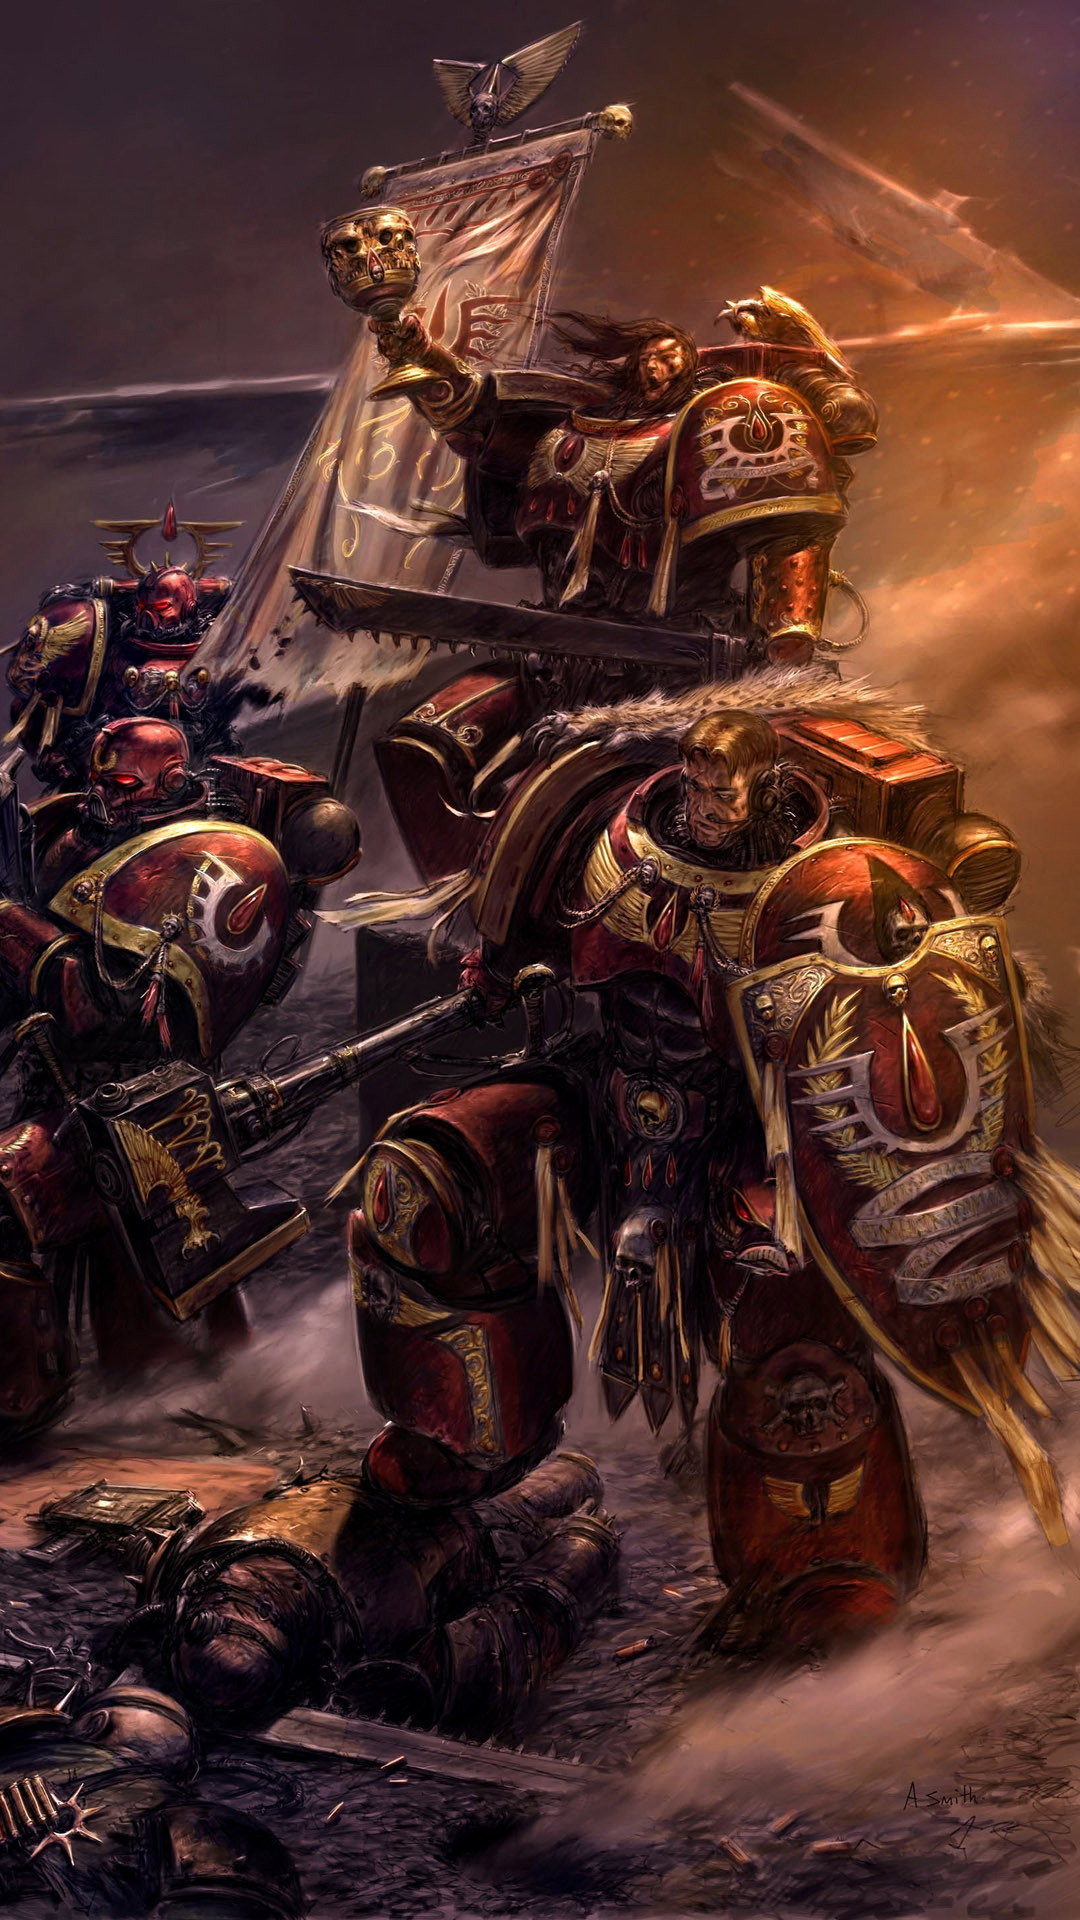 blood angels wallpaper,action adventure game,cg artwork,games,warlord,fictional character